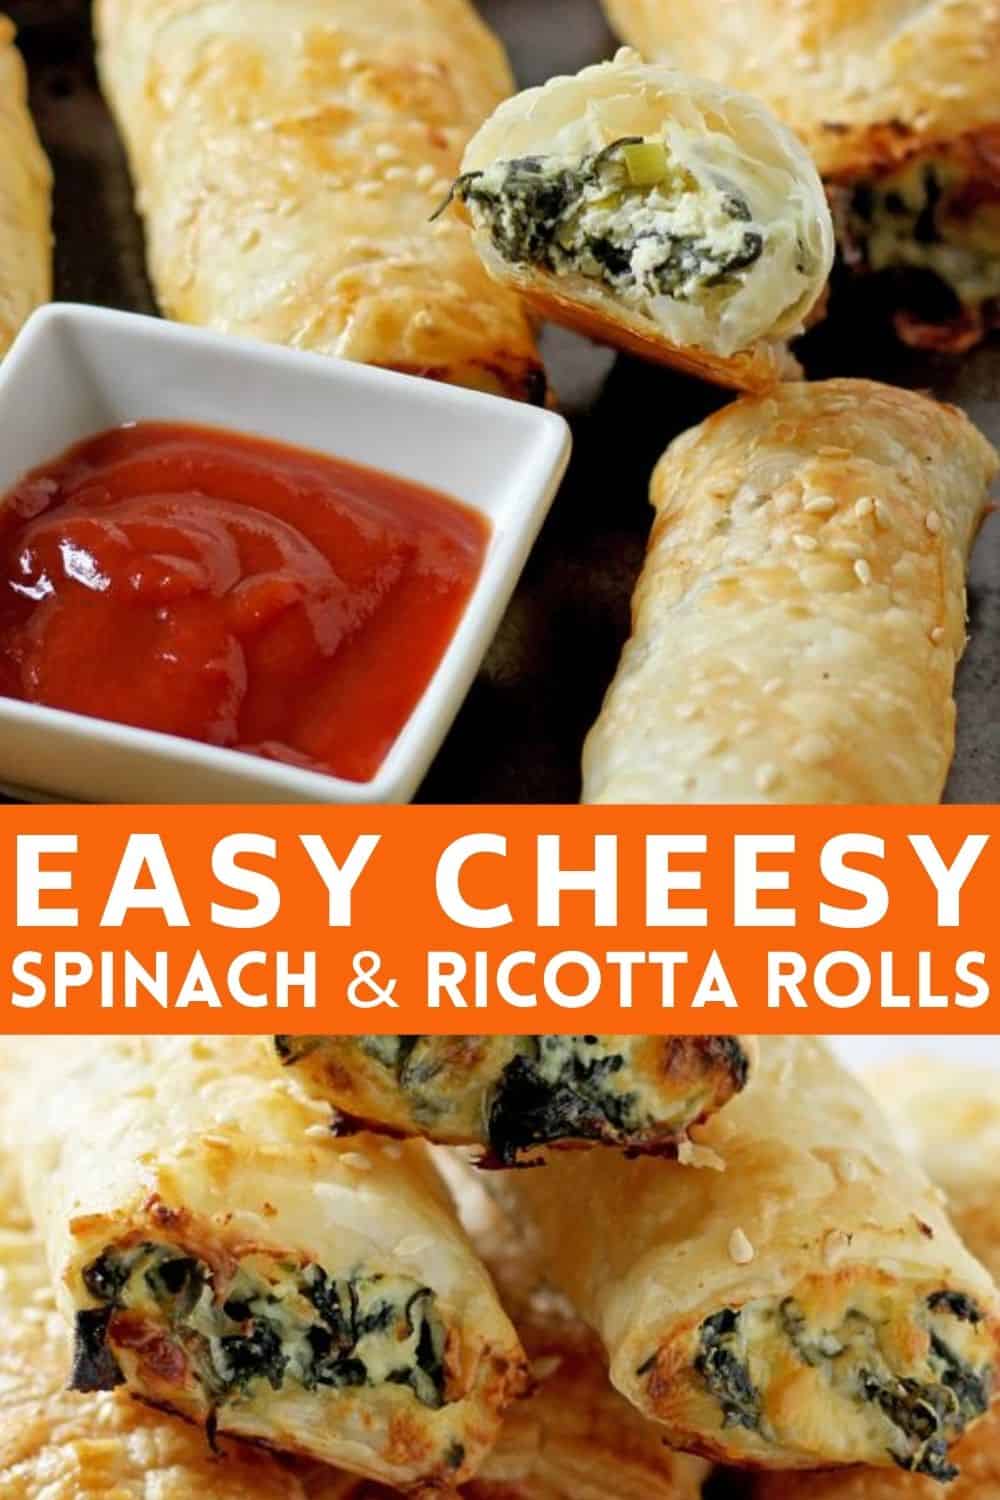 Spinach and Ricotta Rolls {Oven or Air Fryer} - Cook it Real Good